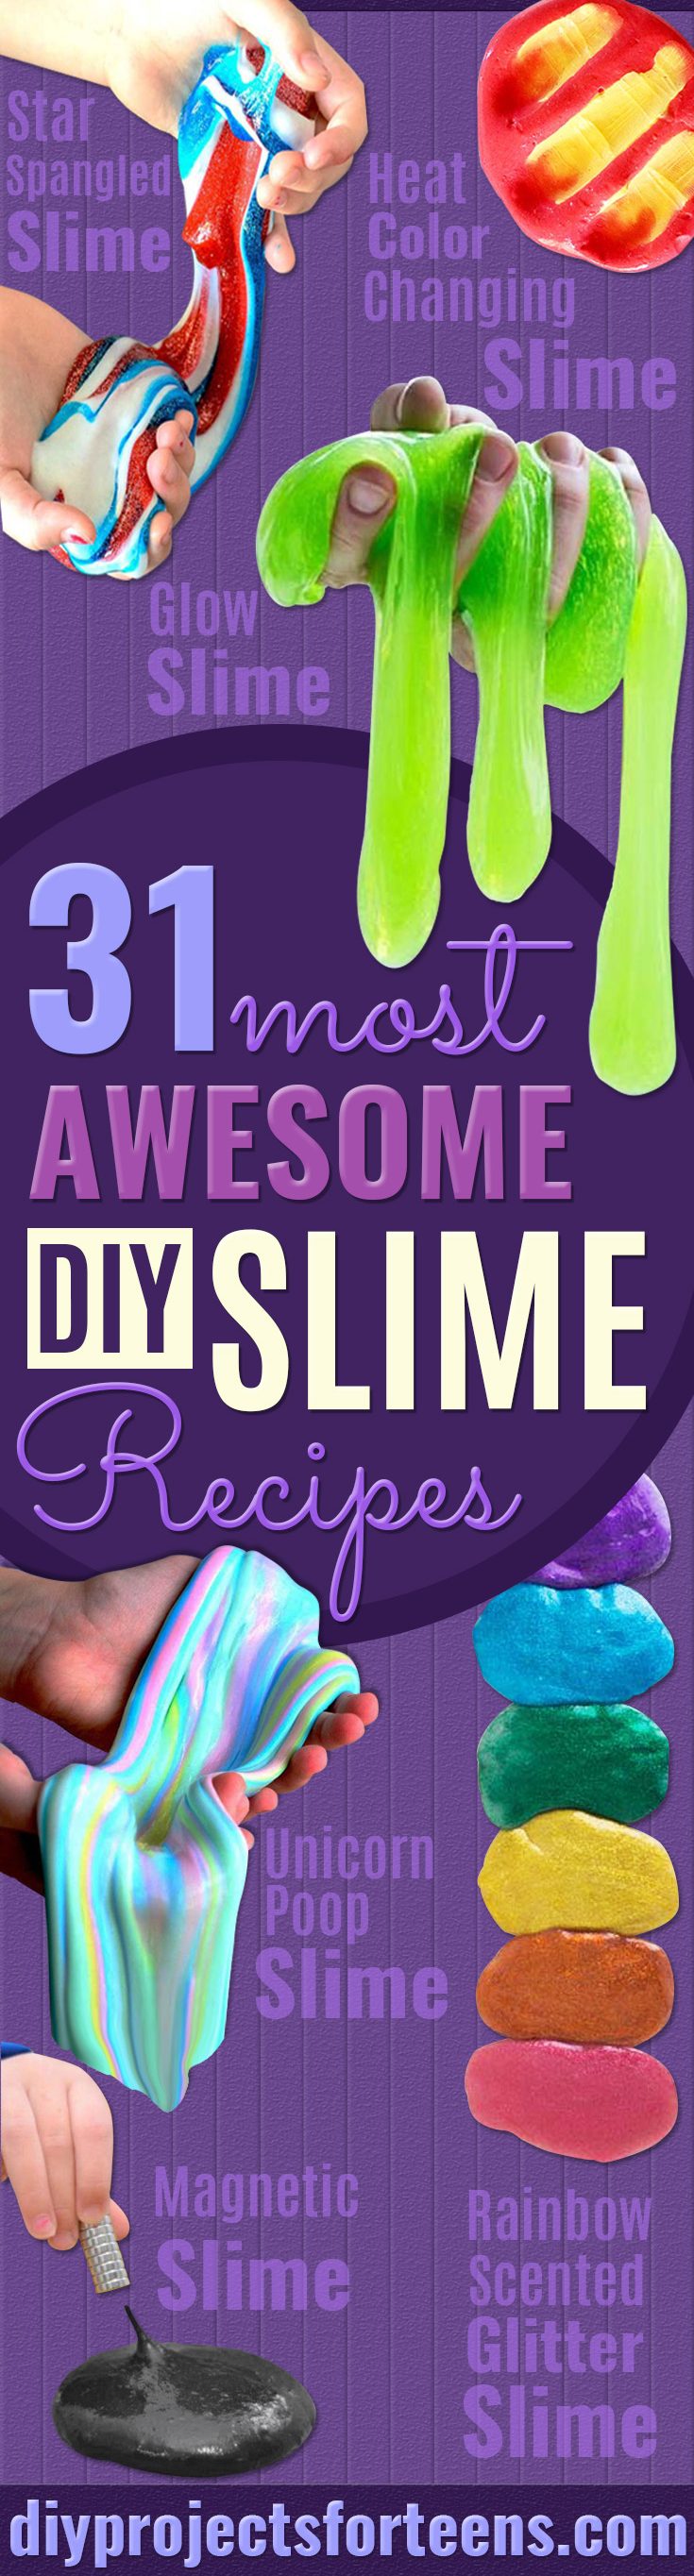 Best DIY Slime Recipes - Cool and Easy Slime Recipe Ideas Without Glue, Without Borax, For Kids, With Liquid Starch, Cornstarch and Laundry Detergent - How to Make Slime at Home - Fun Crafts and DIY Projects for Teens, Kids, Teenagers and Teens - Galaxy and Glitter Slime, Edible Slime #slime #slimerecipes #slimes #diyslime #teencrafts #diyslime